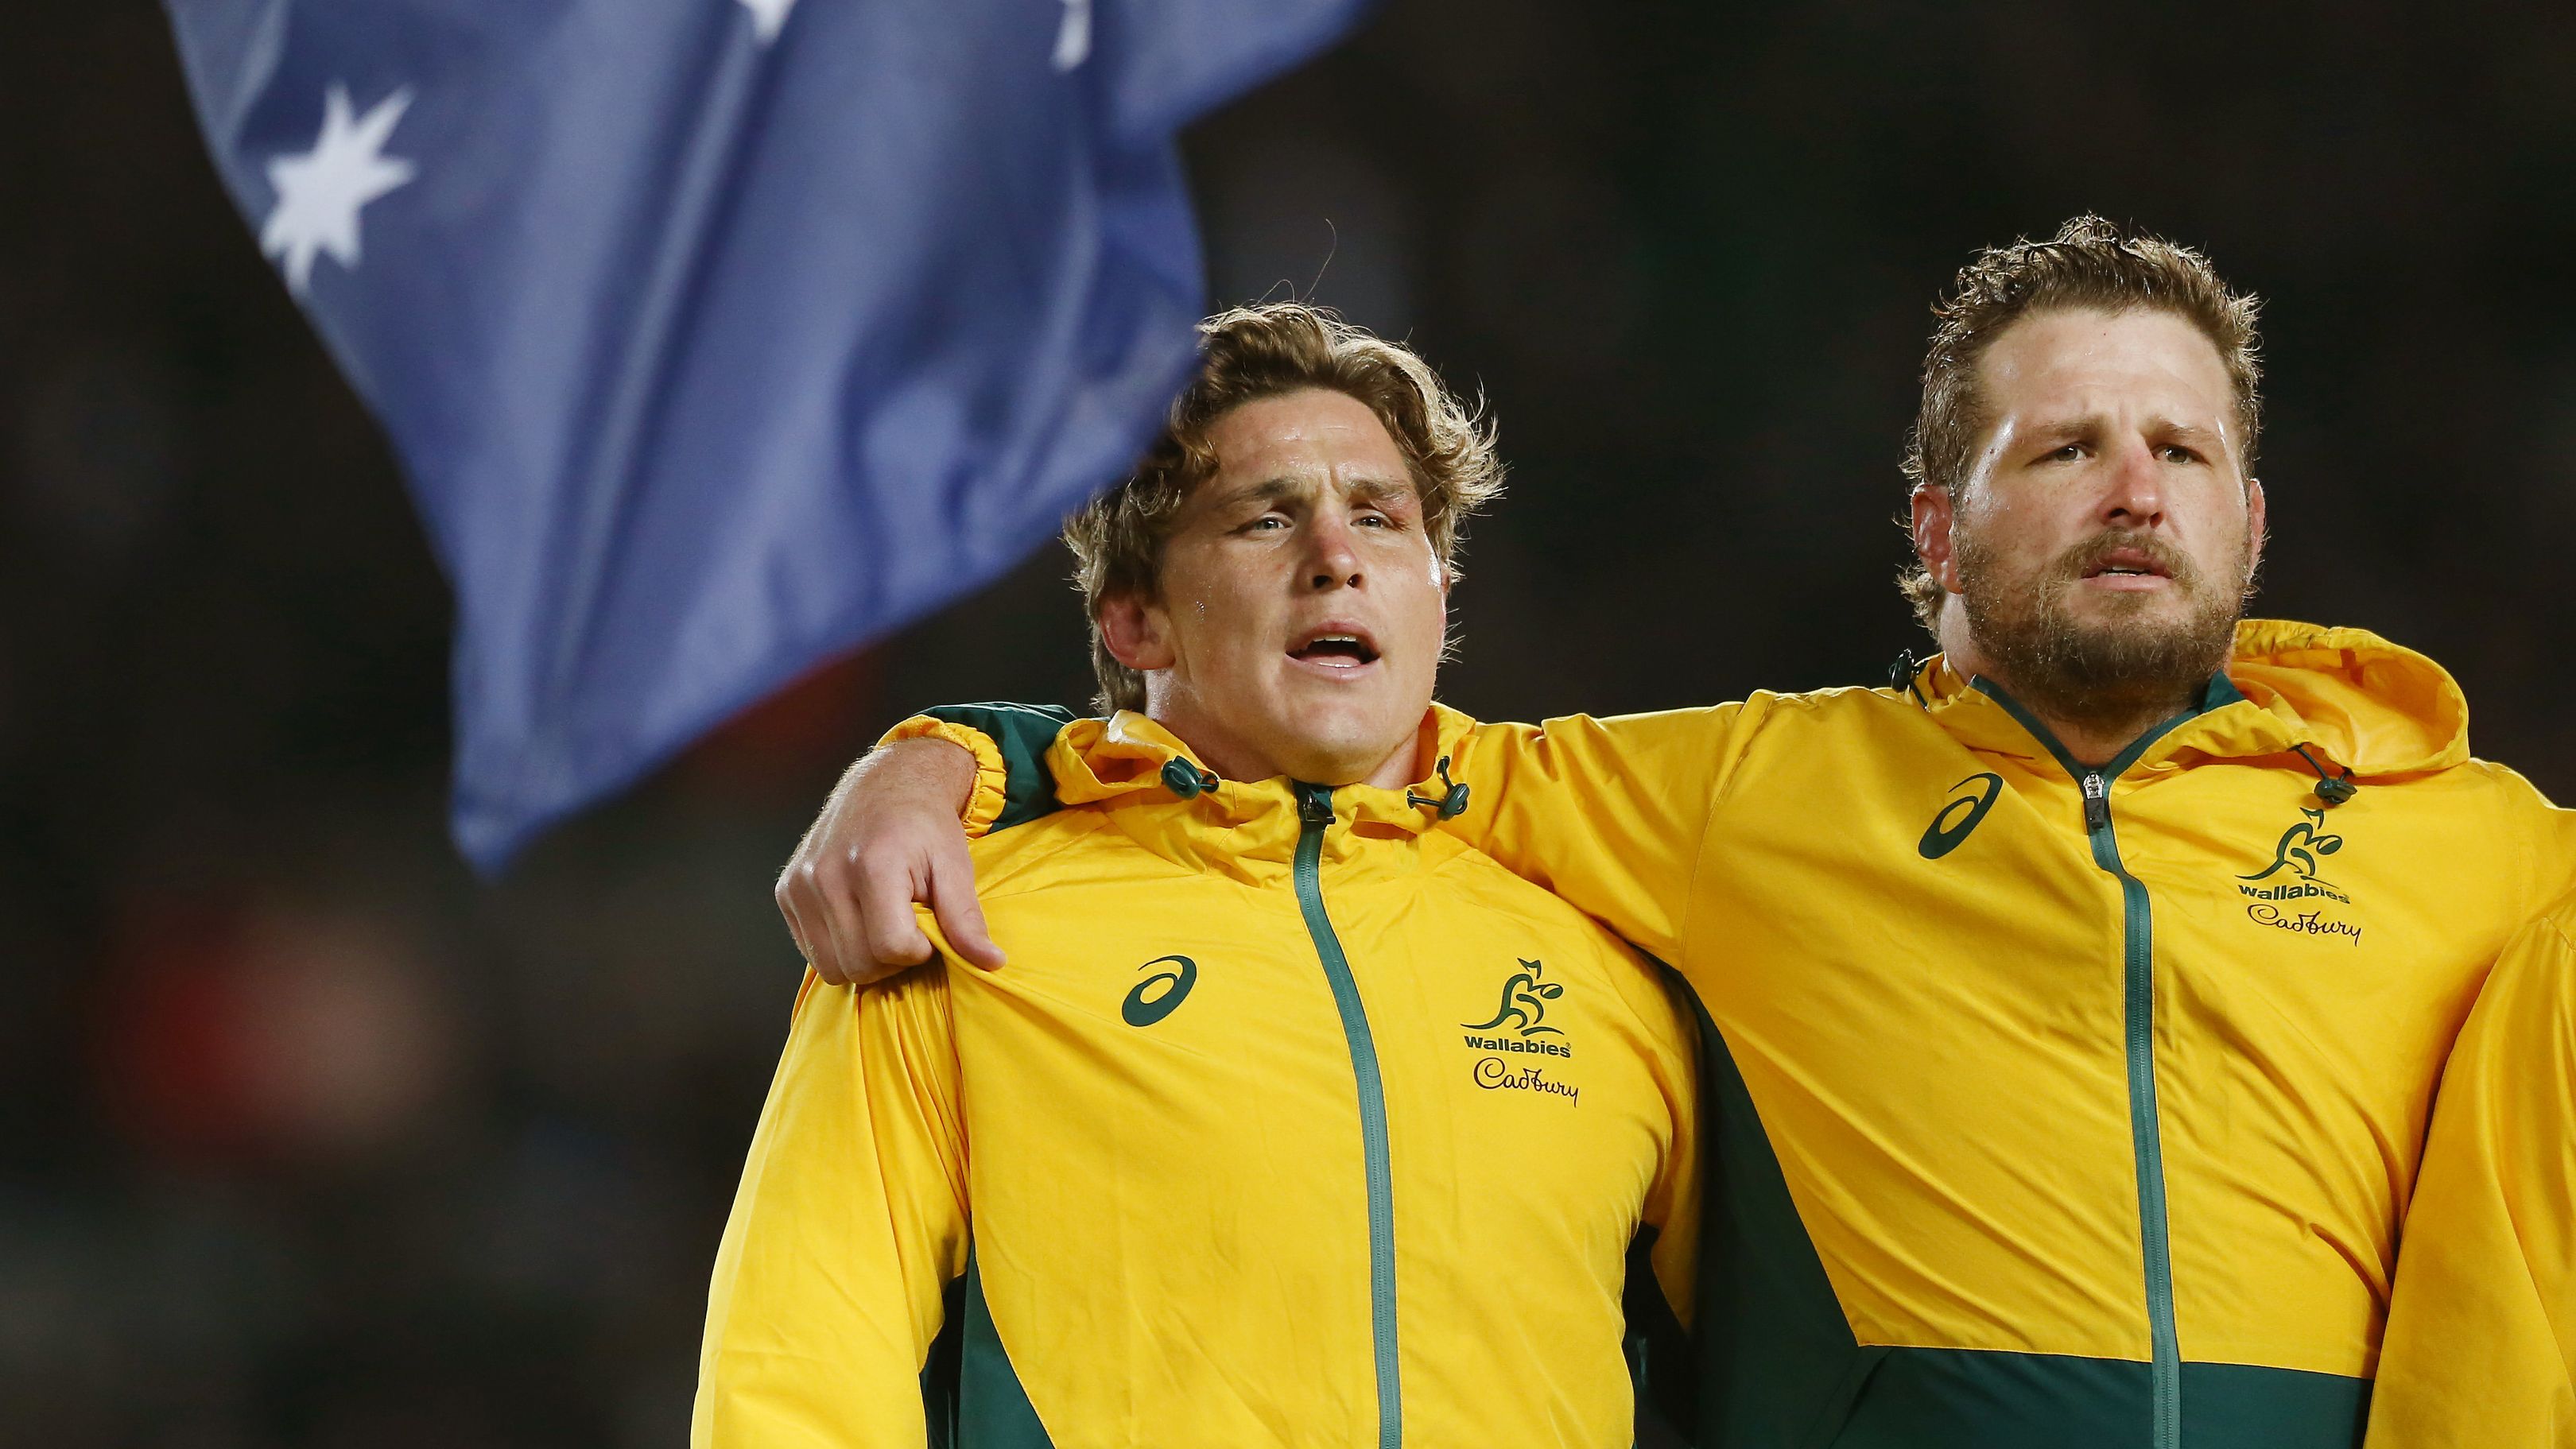 Michael Hooper and James Slipper of the Wallabies sing the national anthem.